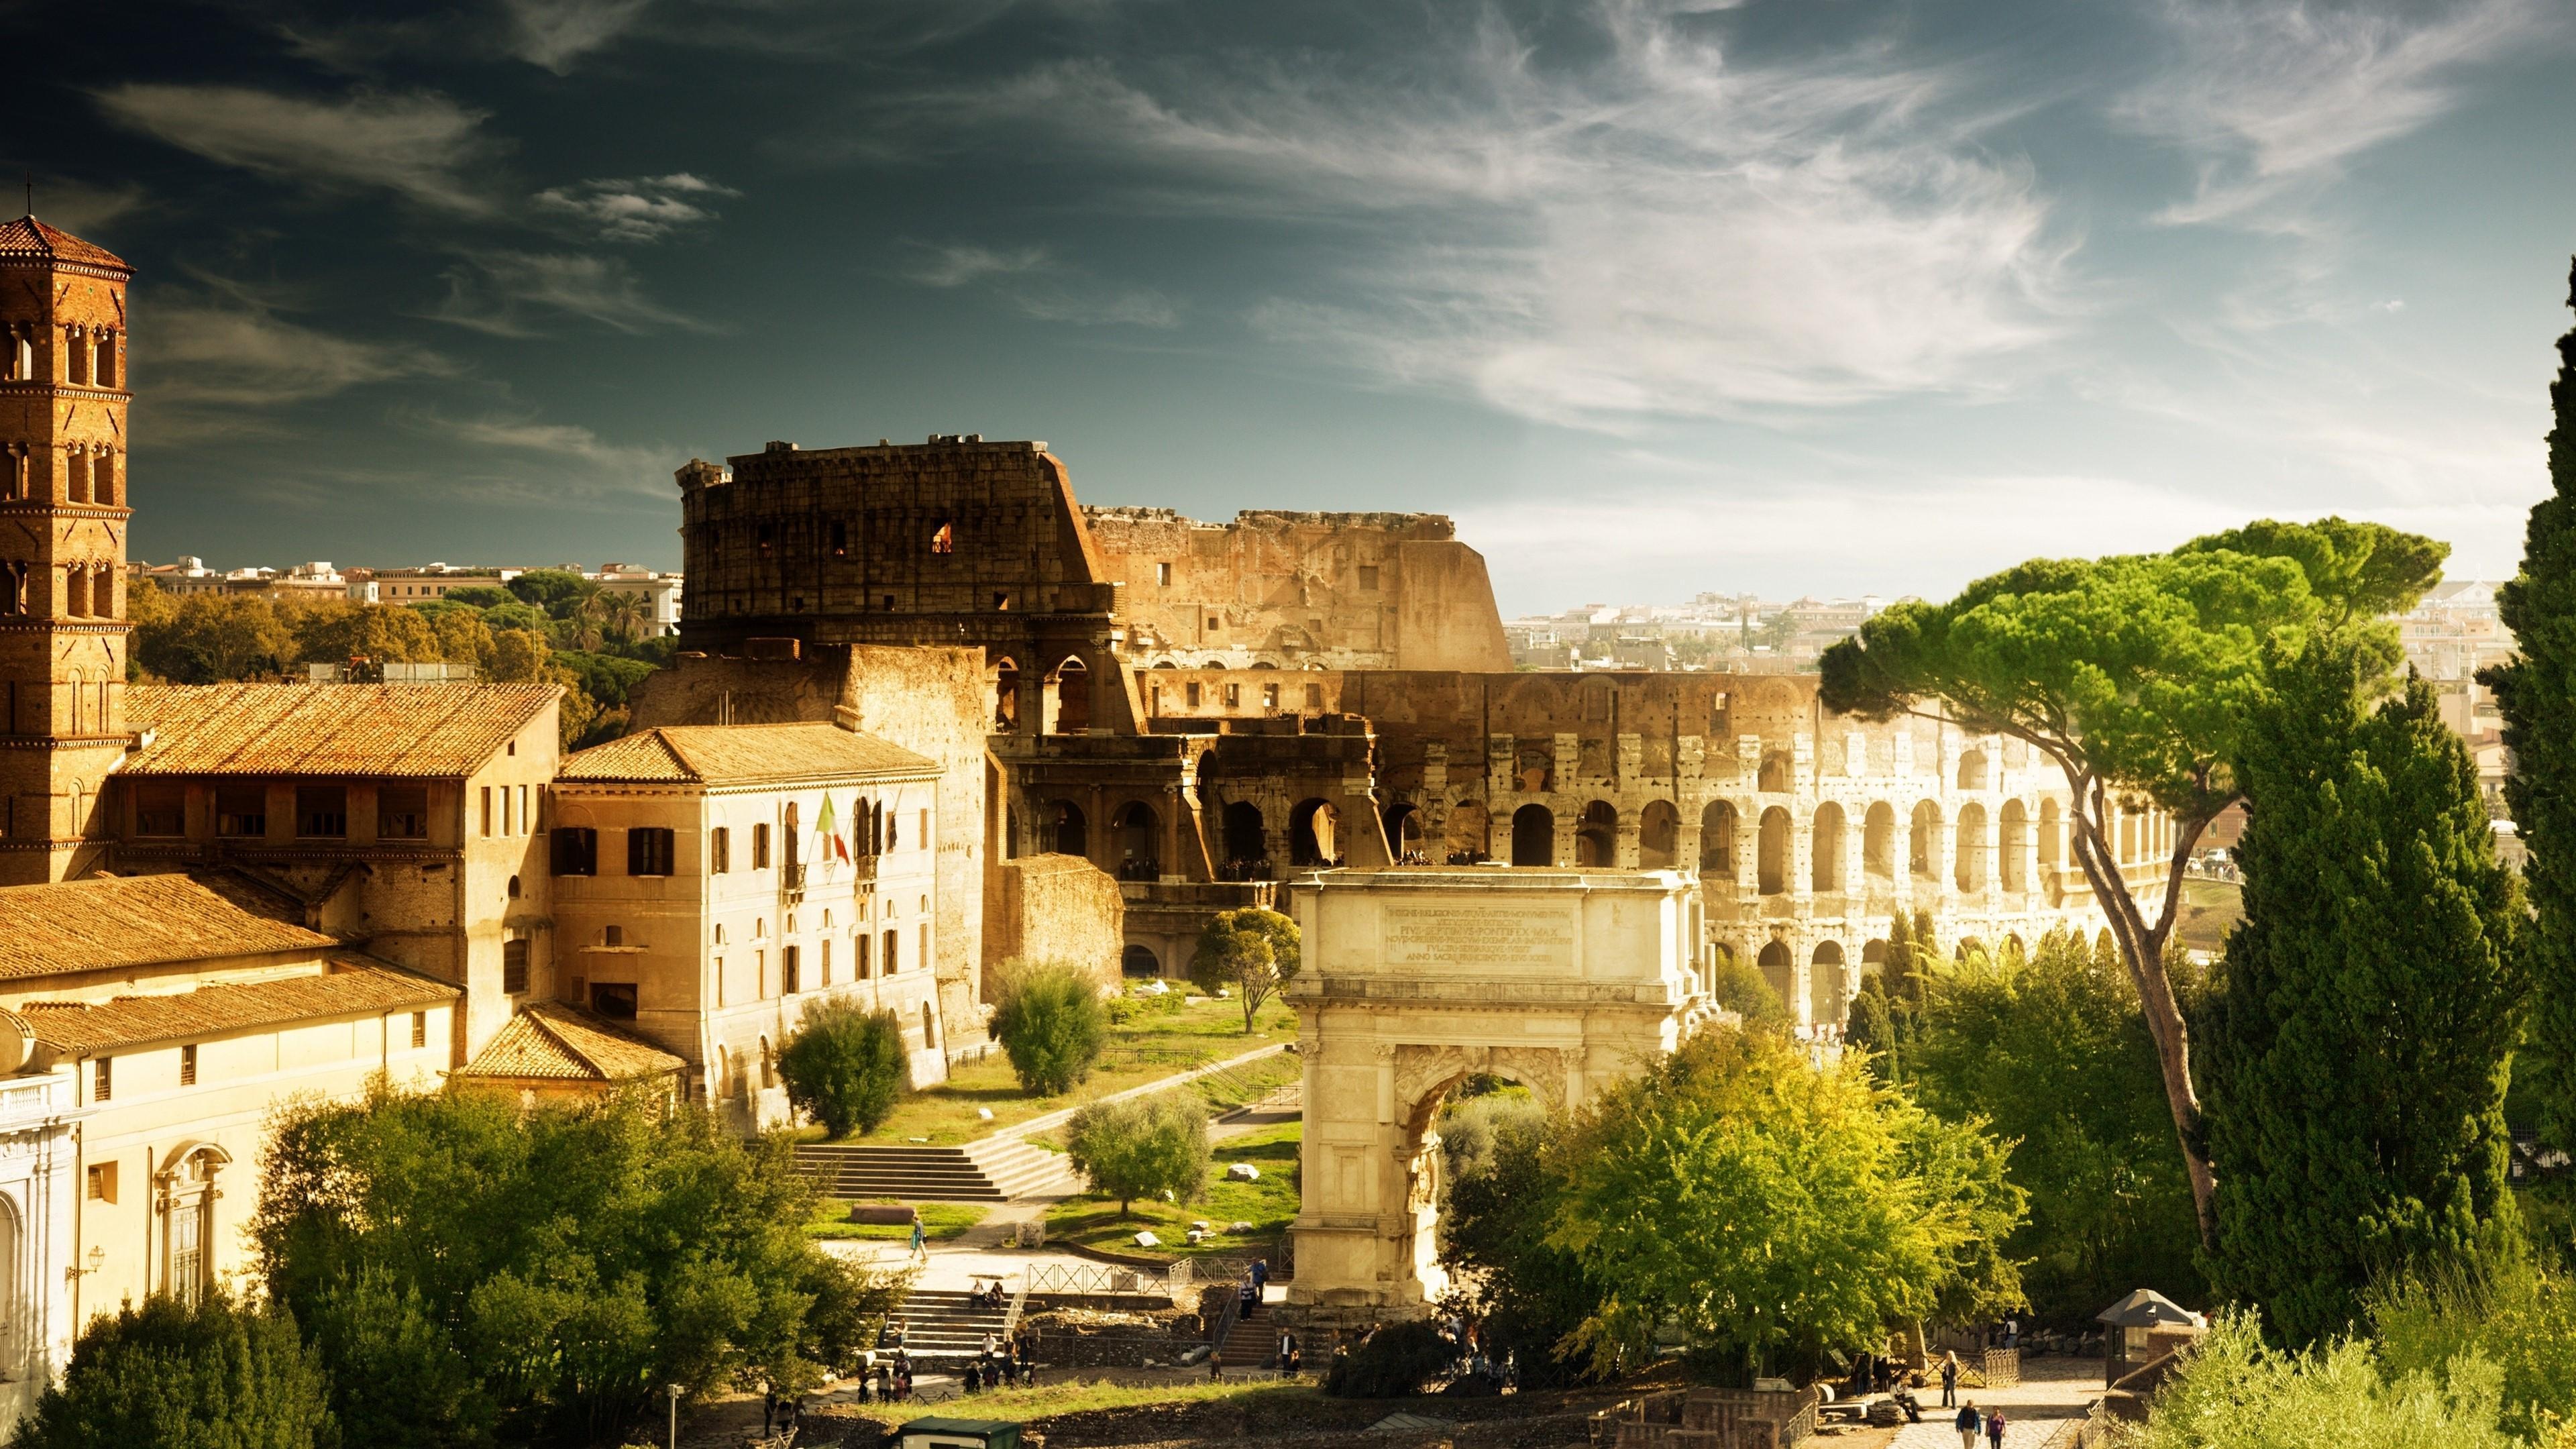 HD wallpaper, Italy, Trees, Home, People 4K, Architecture, Colosseum, Rome, Arch Of Constantine